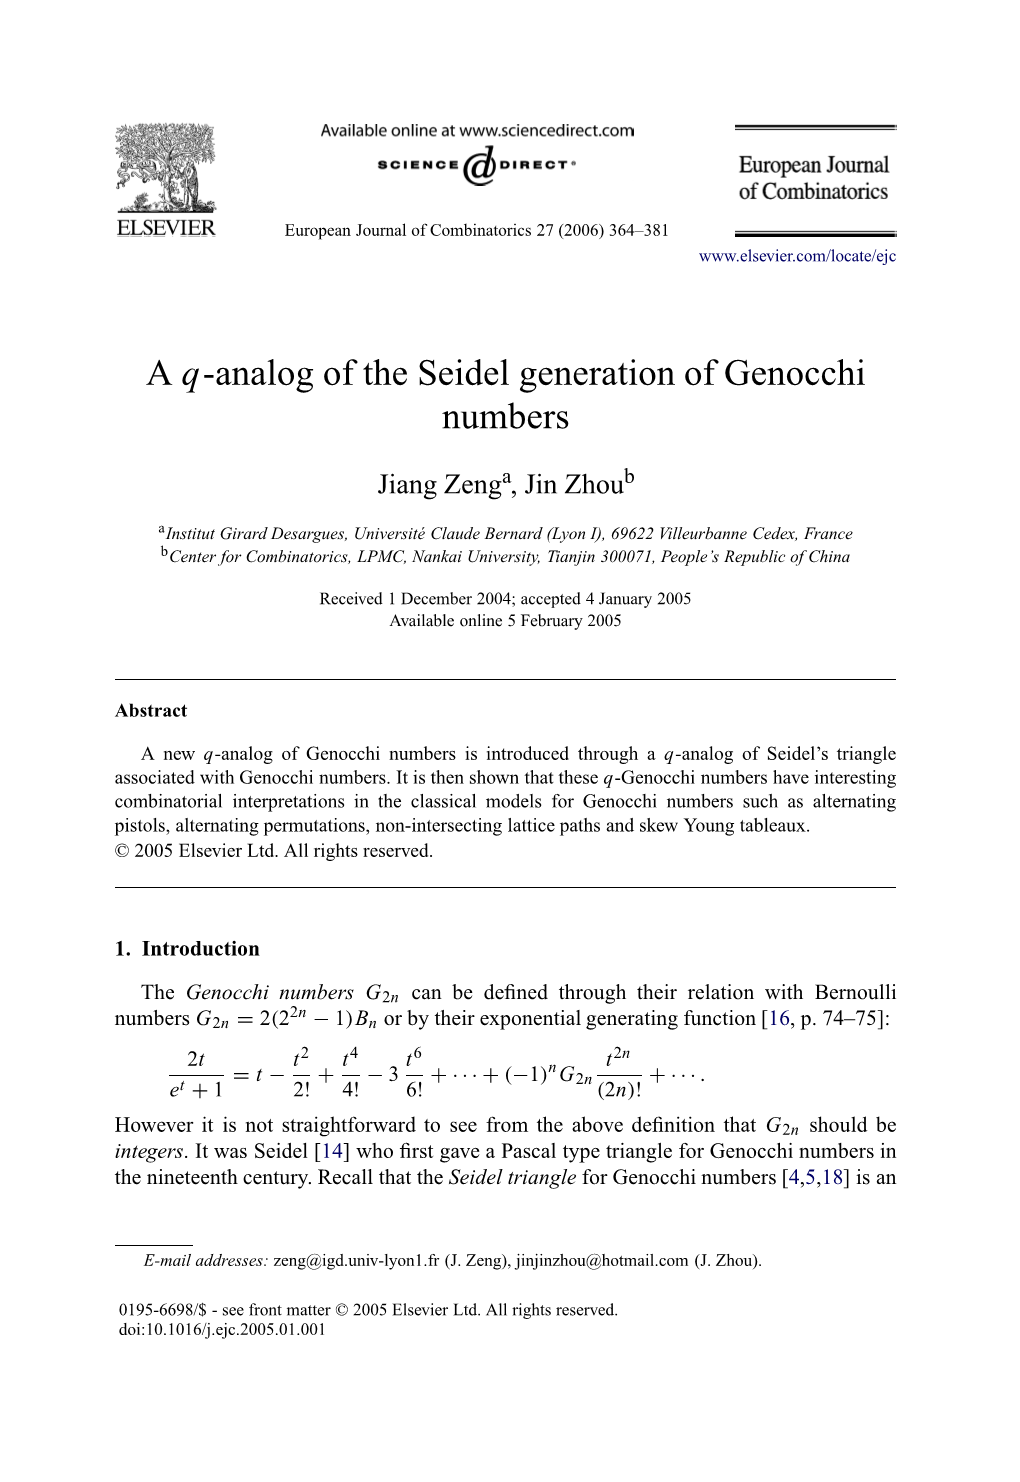 A Q-Analog of the Seidel Generation of Genocchi Numbers